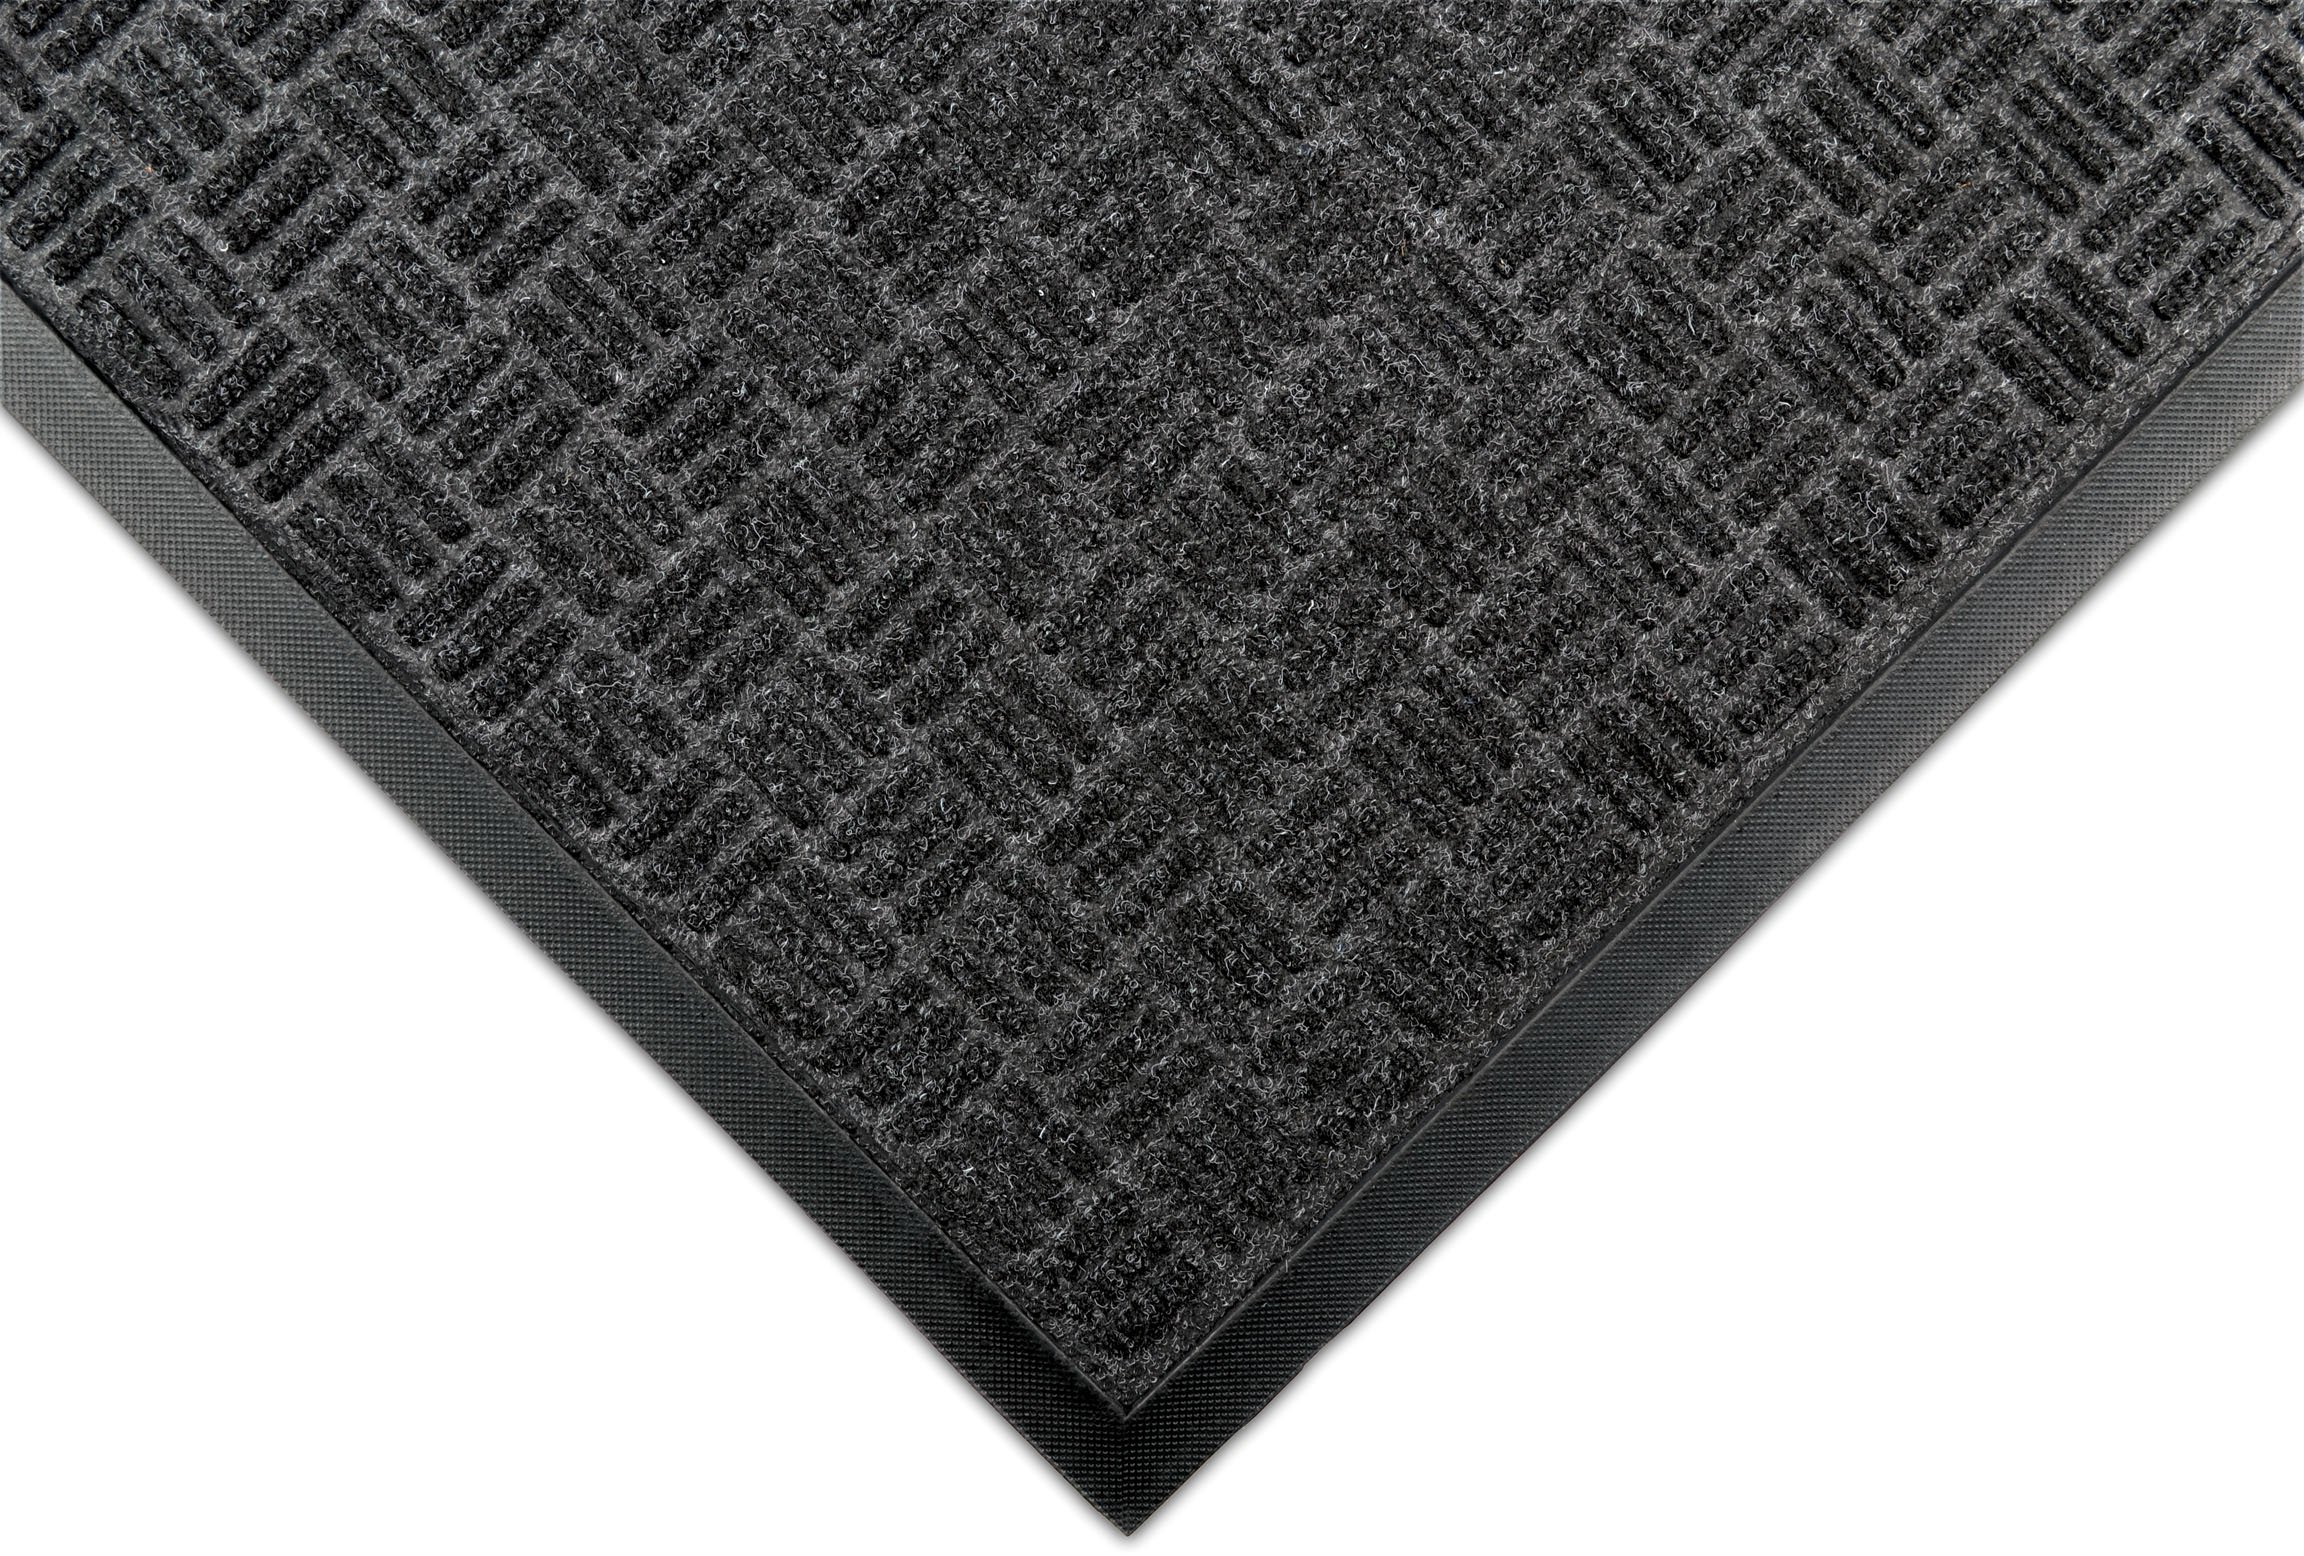 Notrax 167 Portraita Rubber-Backed Entrance Mat, For Home Or Office 3 X 10 Charcoal